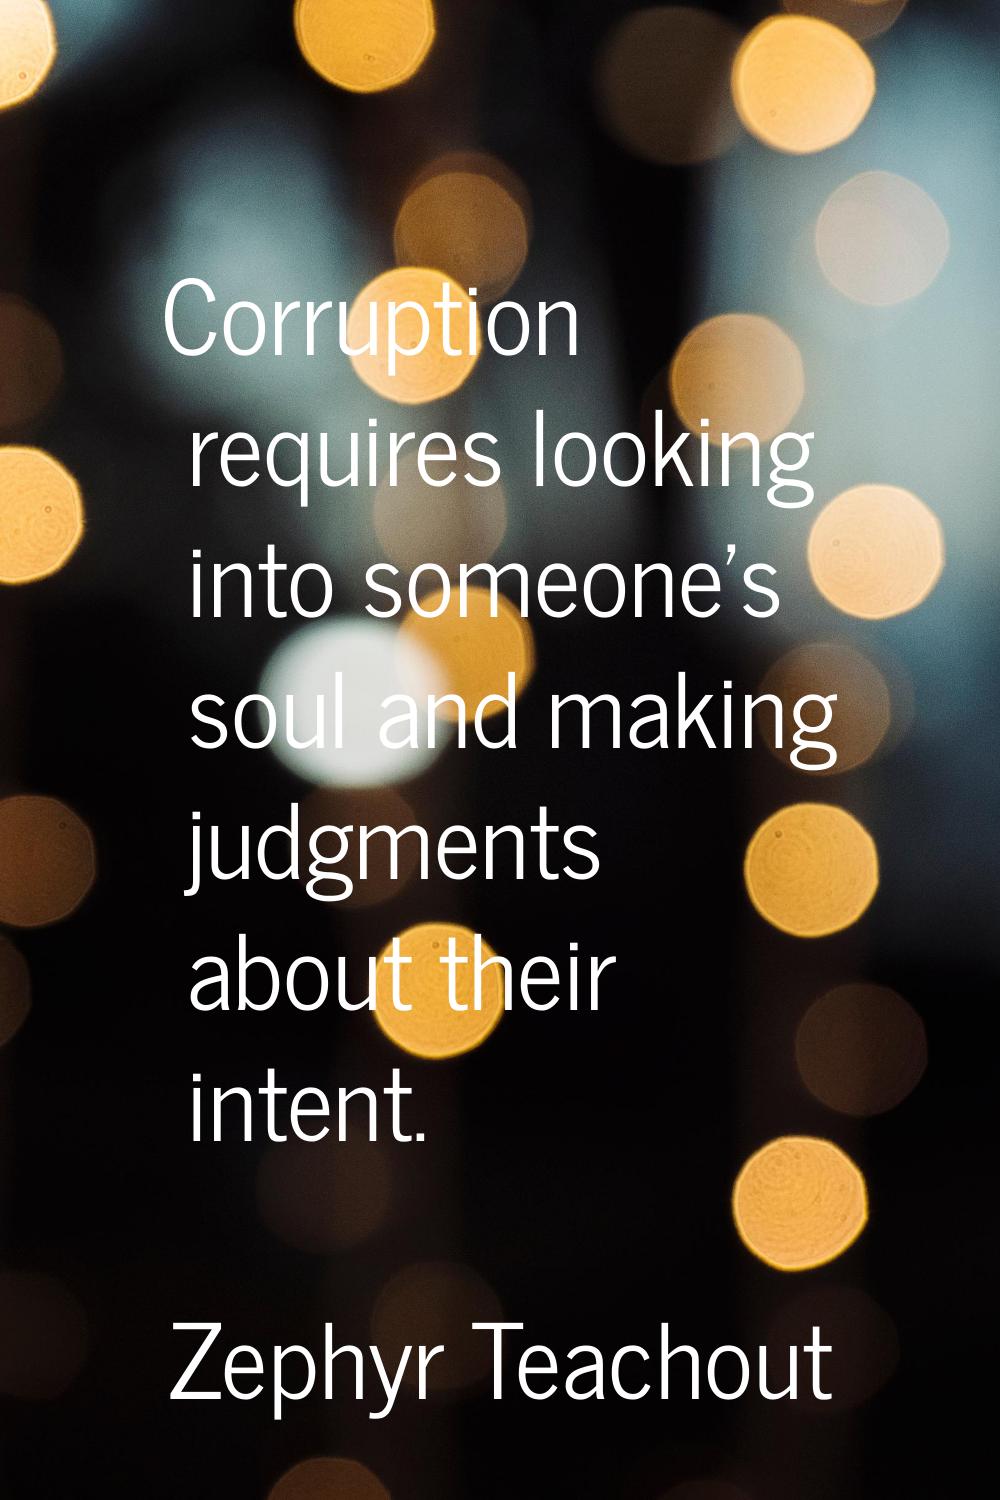 Corruption requires looking into someone's soul and making judgments about their intent.